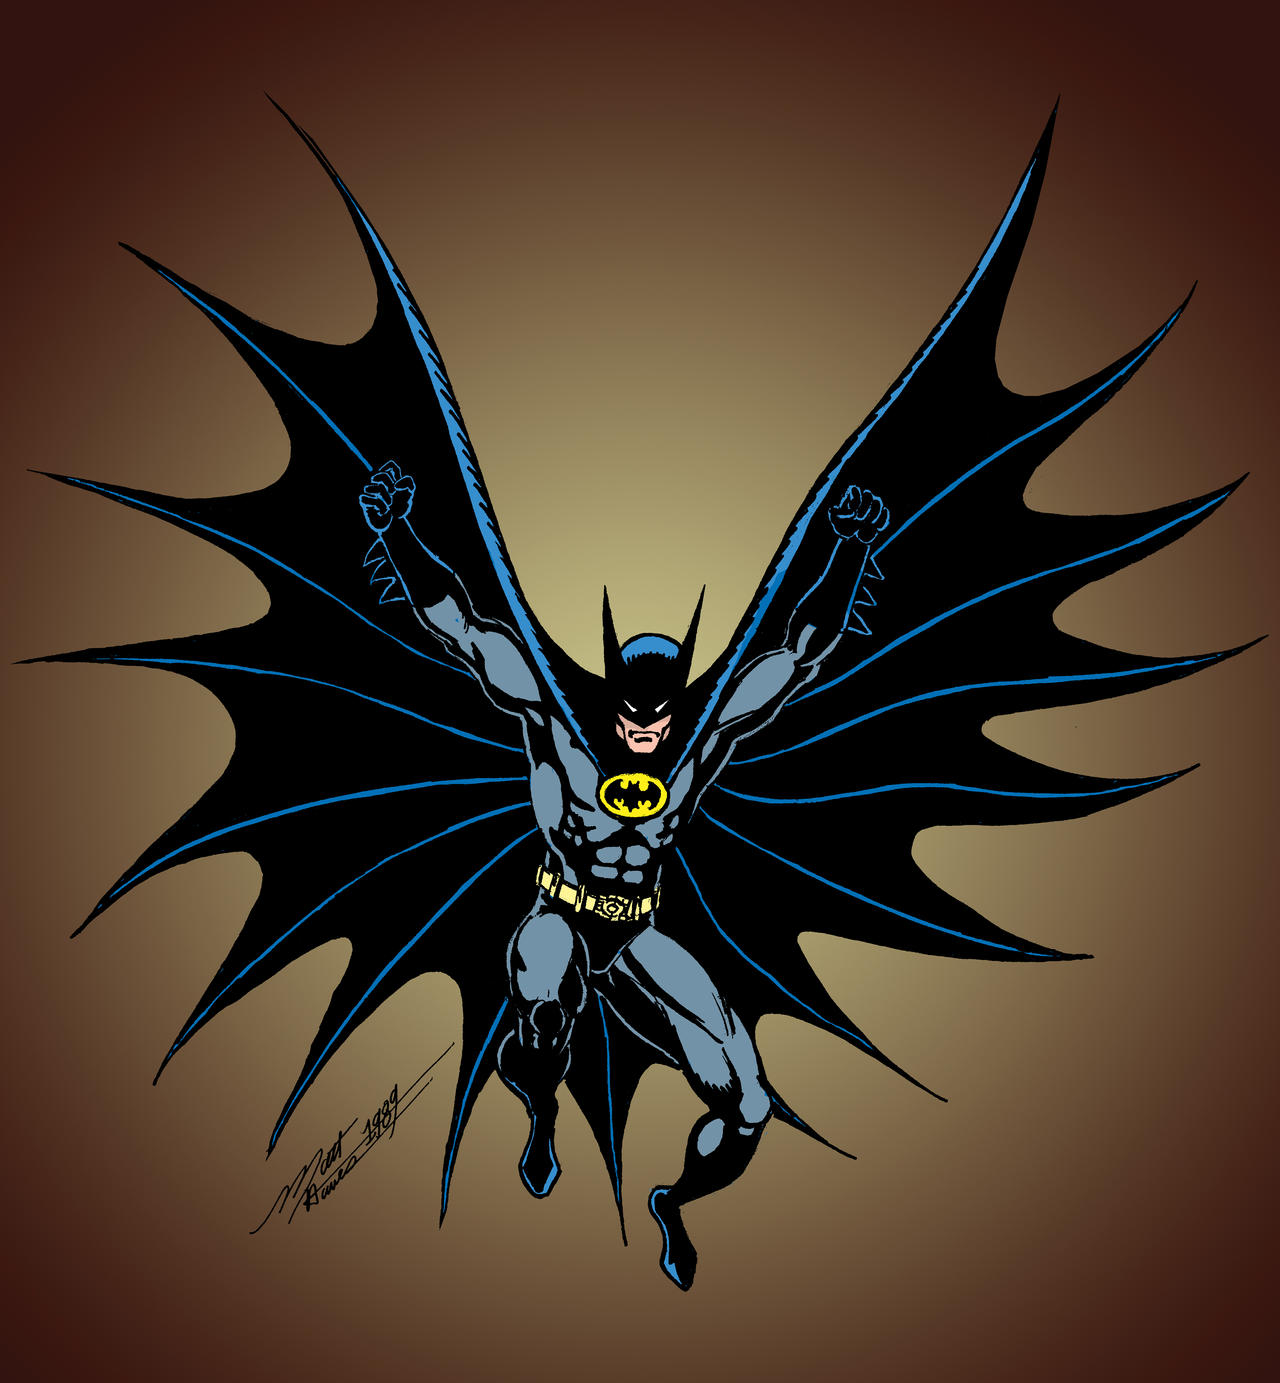 1989-batman-jumping-color-revised-2019 by MattHawes on DeviantArt